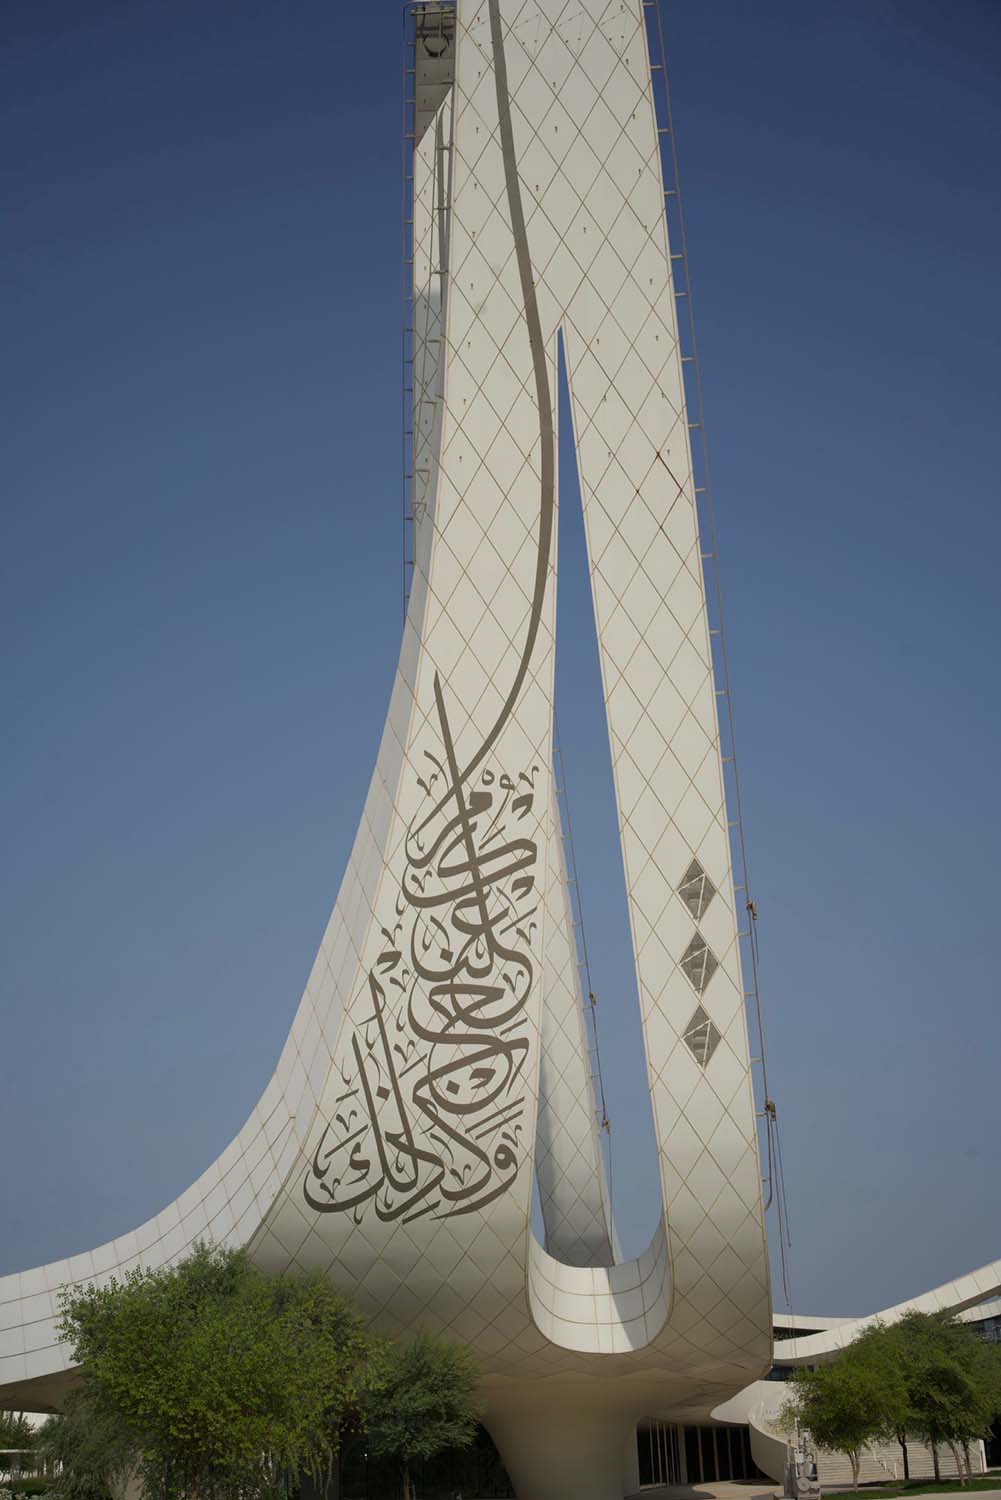 Hamad Bin Khalifa University College of Islamic Studies (QFIS) - View of the base of a minaret showing Qur'anic calligraphy